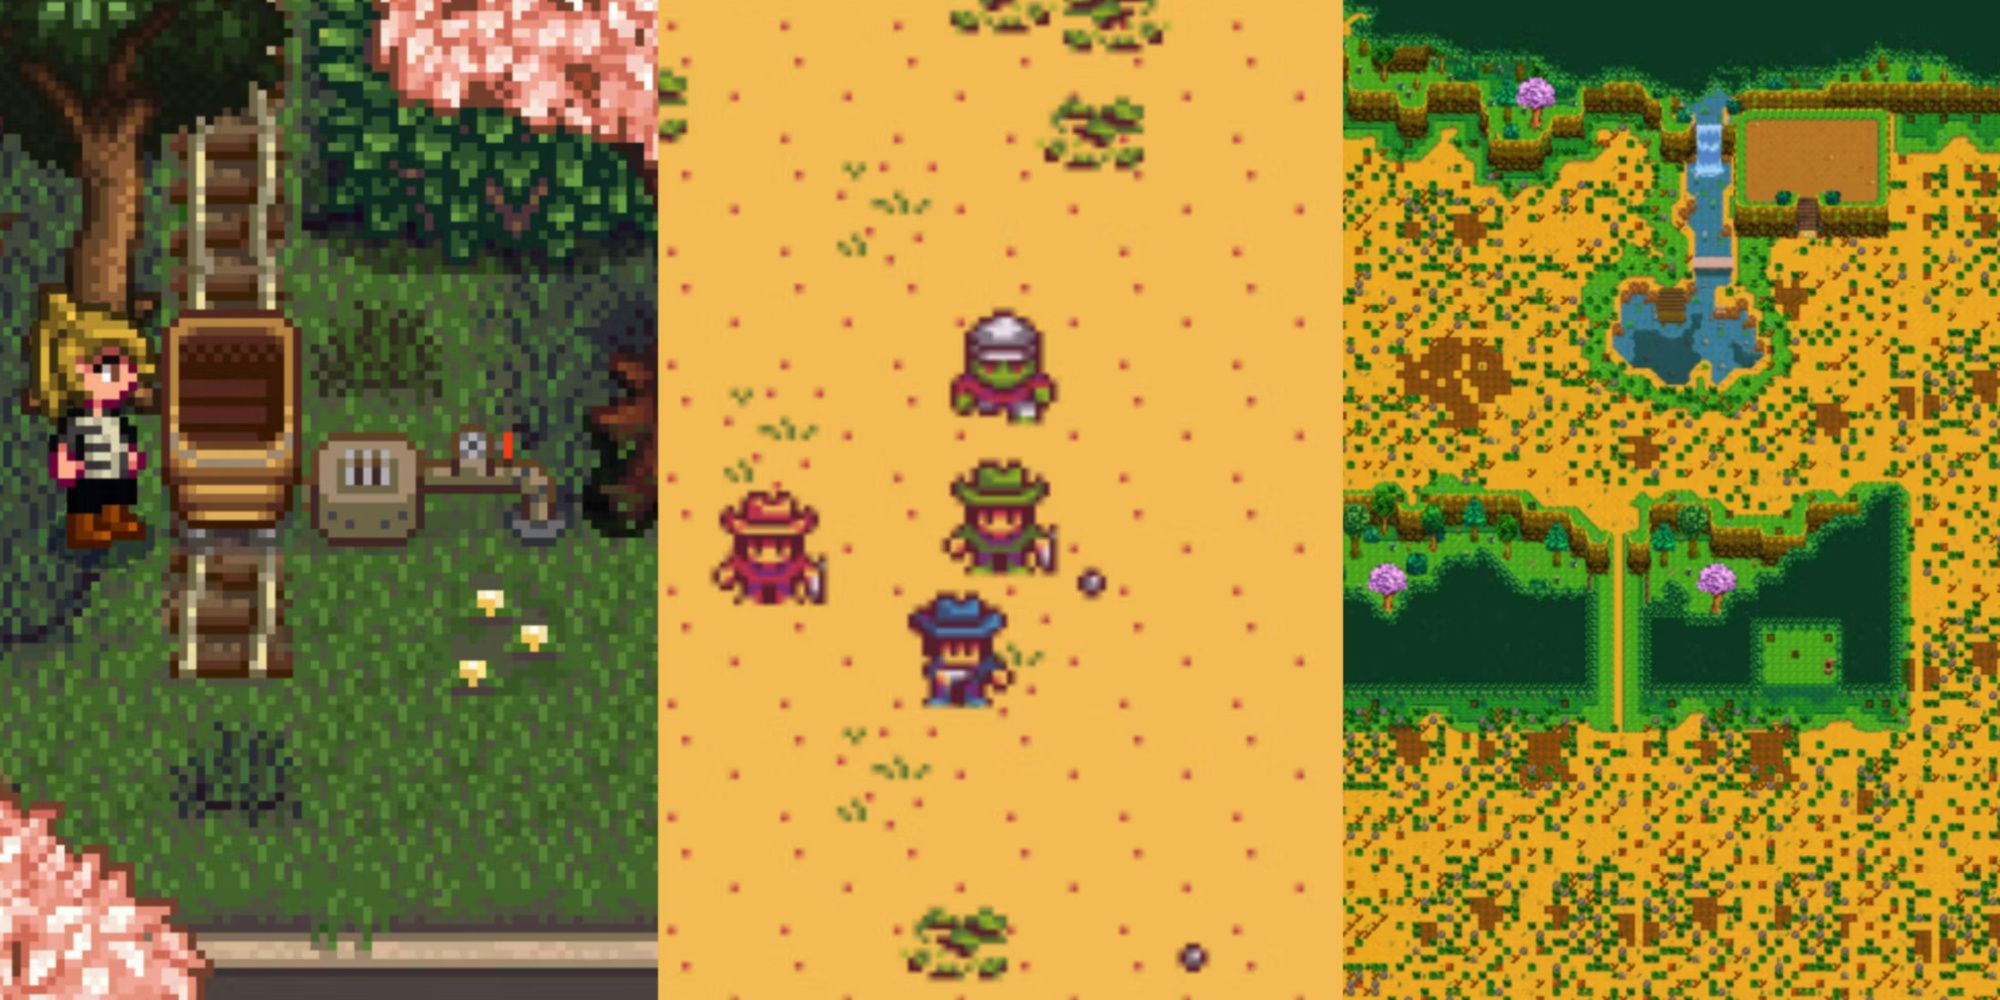 Featured Image Stardew Valley featuring the extended minecart, the multiplayer journey of the prairie king mod, and the extended farm mod